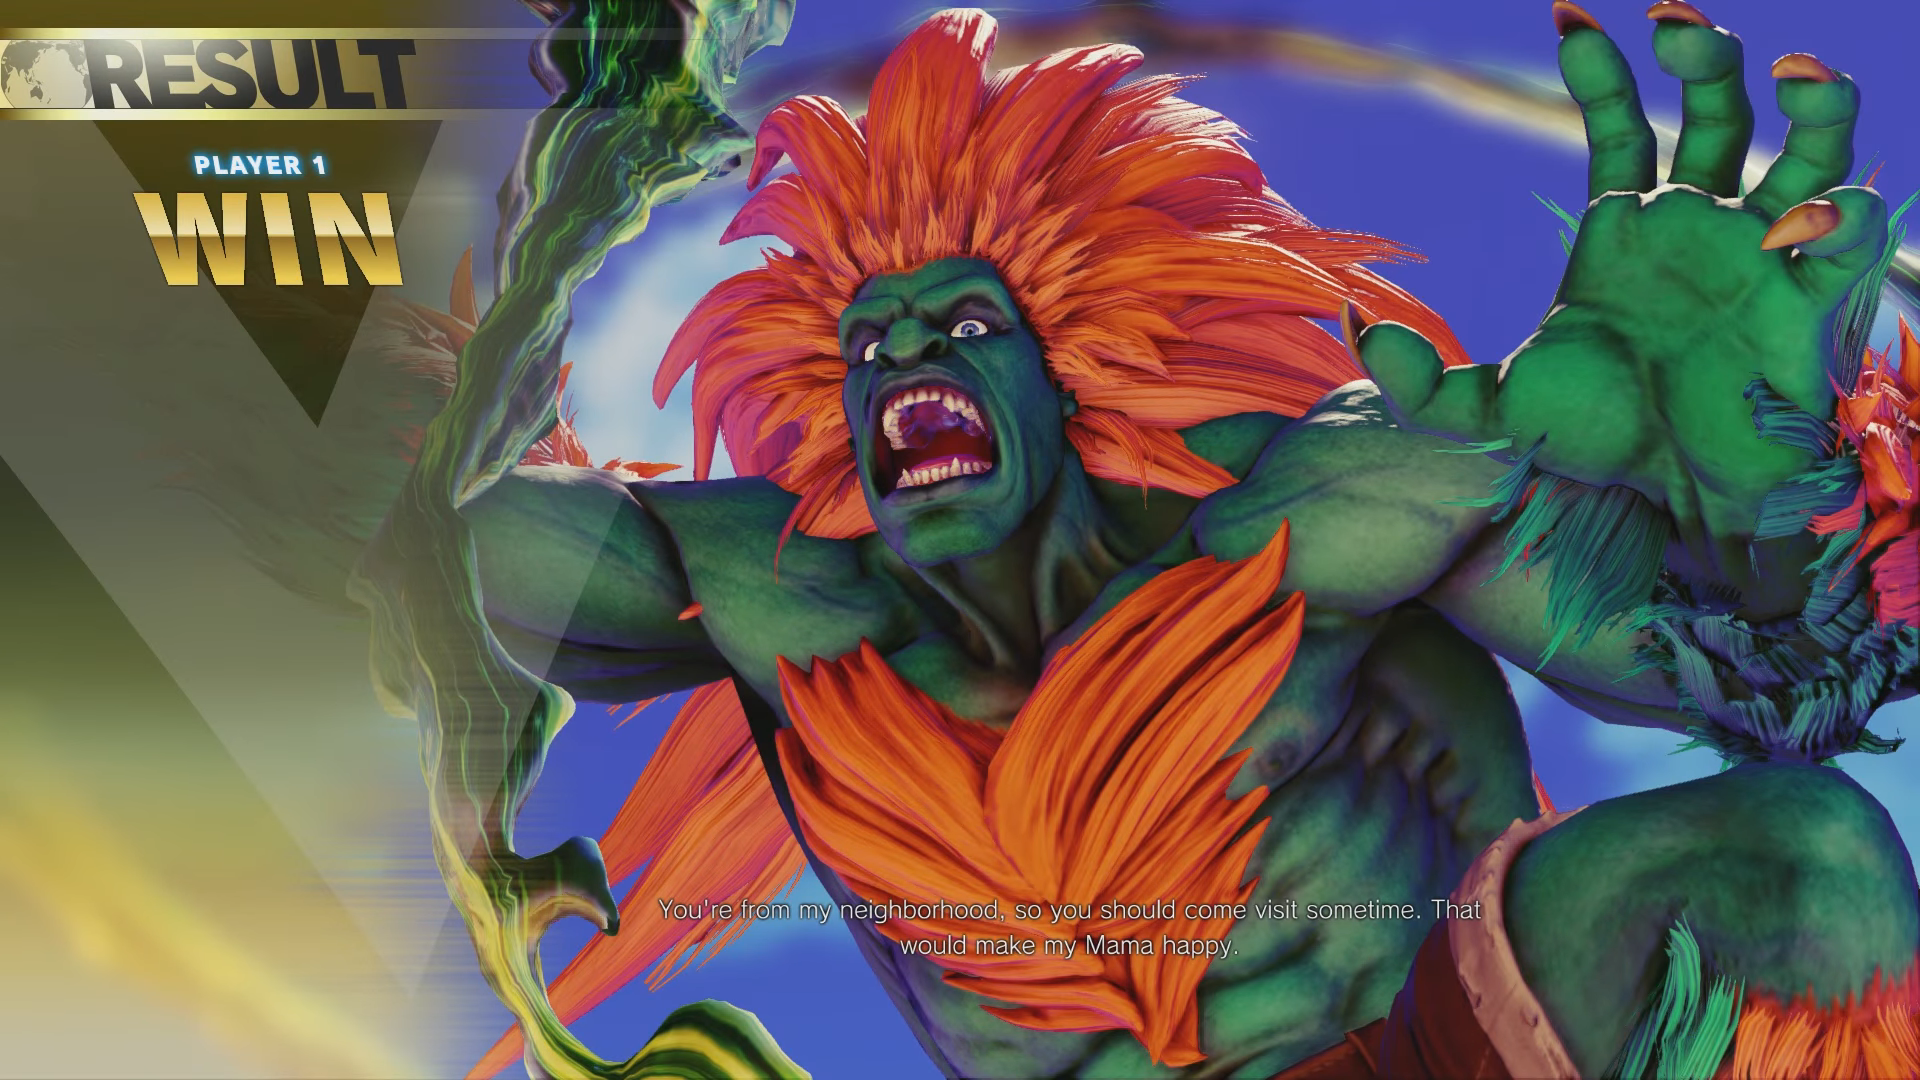 Blanka Comes To Street Fighter 5 On February 20